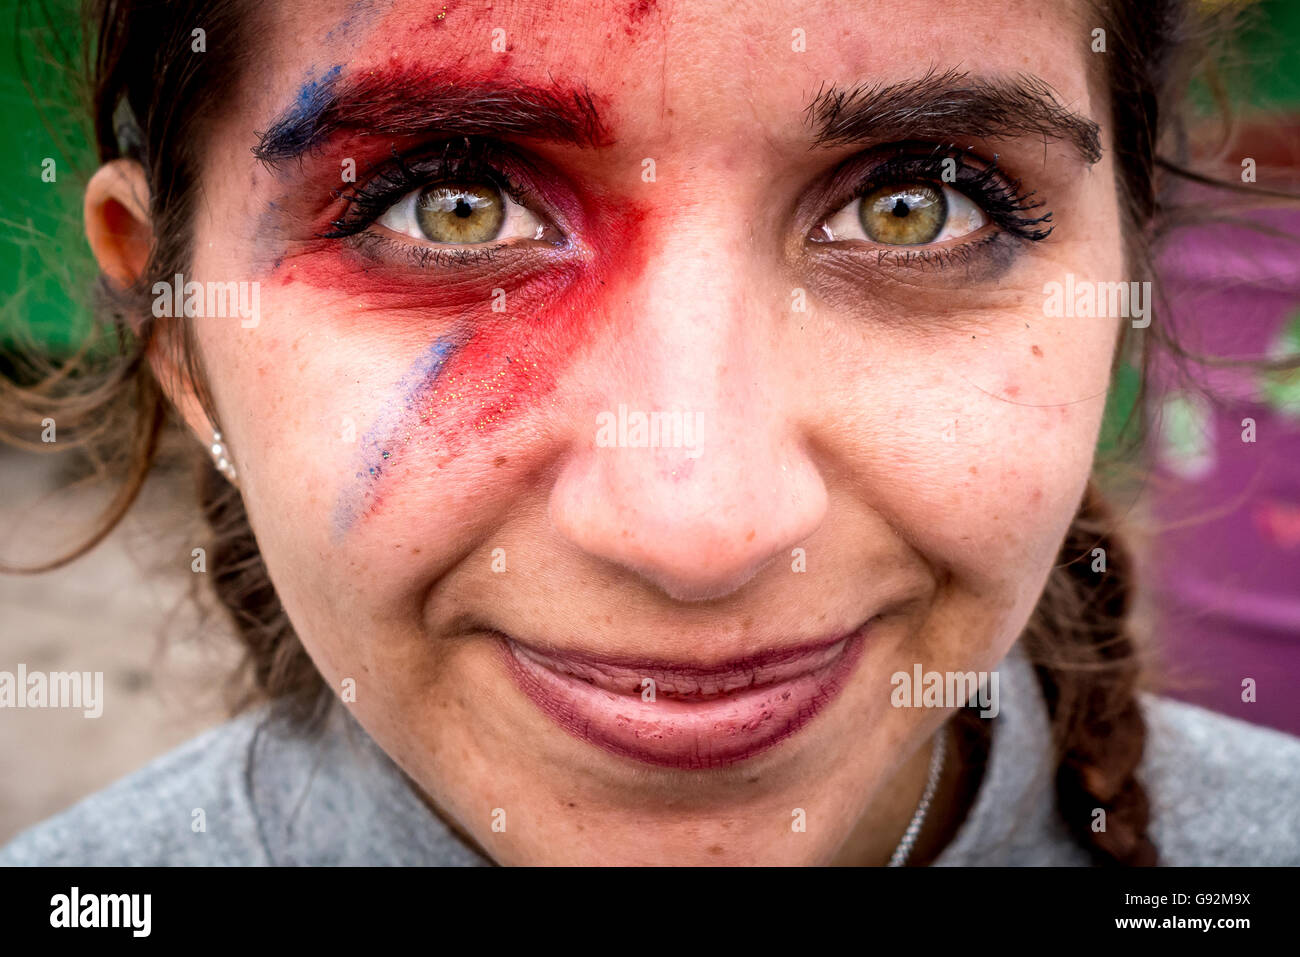 Faded David Bowie tribute make-up at The 2016 Glastonbury Festival of Contemporary Performing Arts. Stock Photo